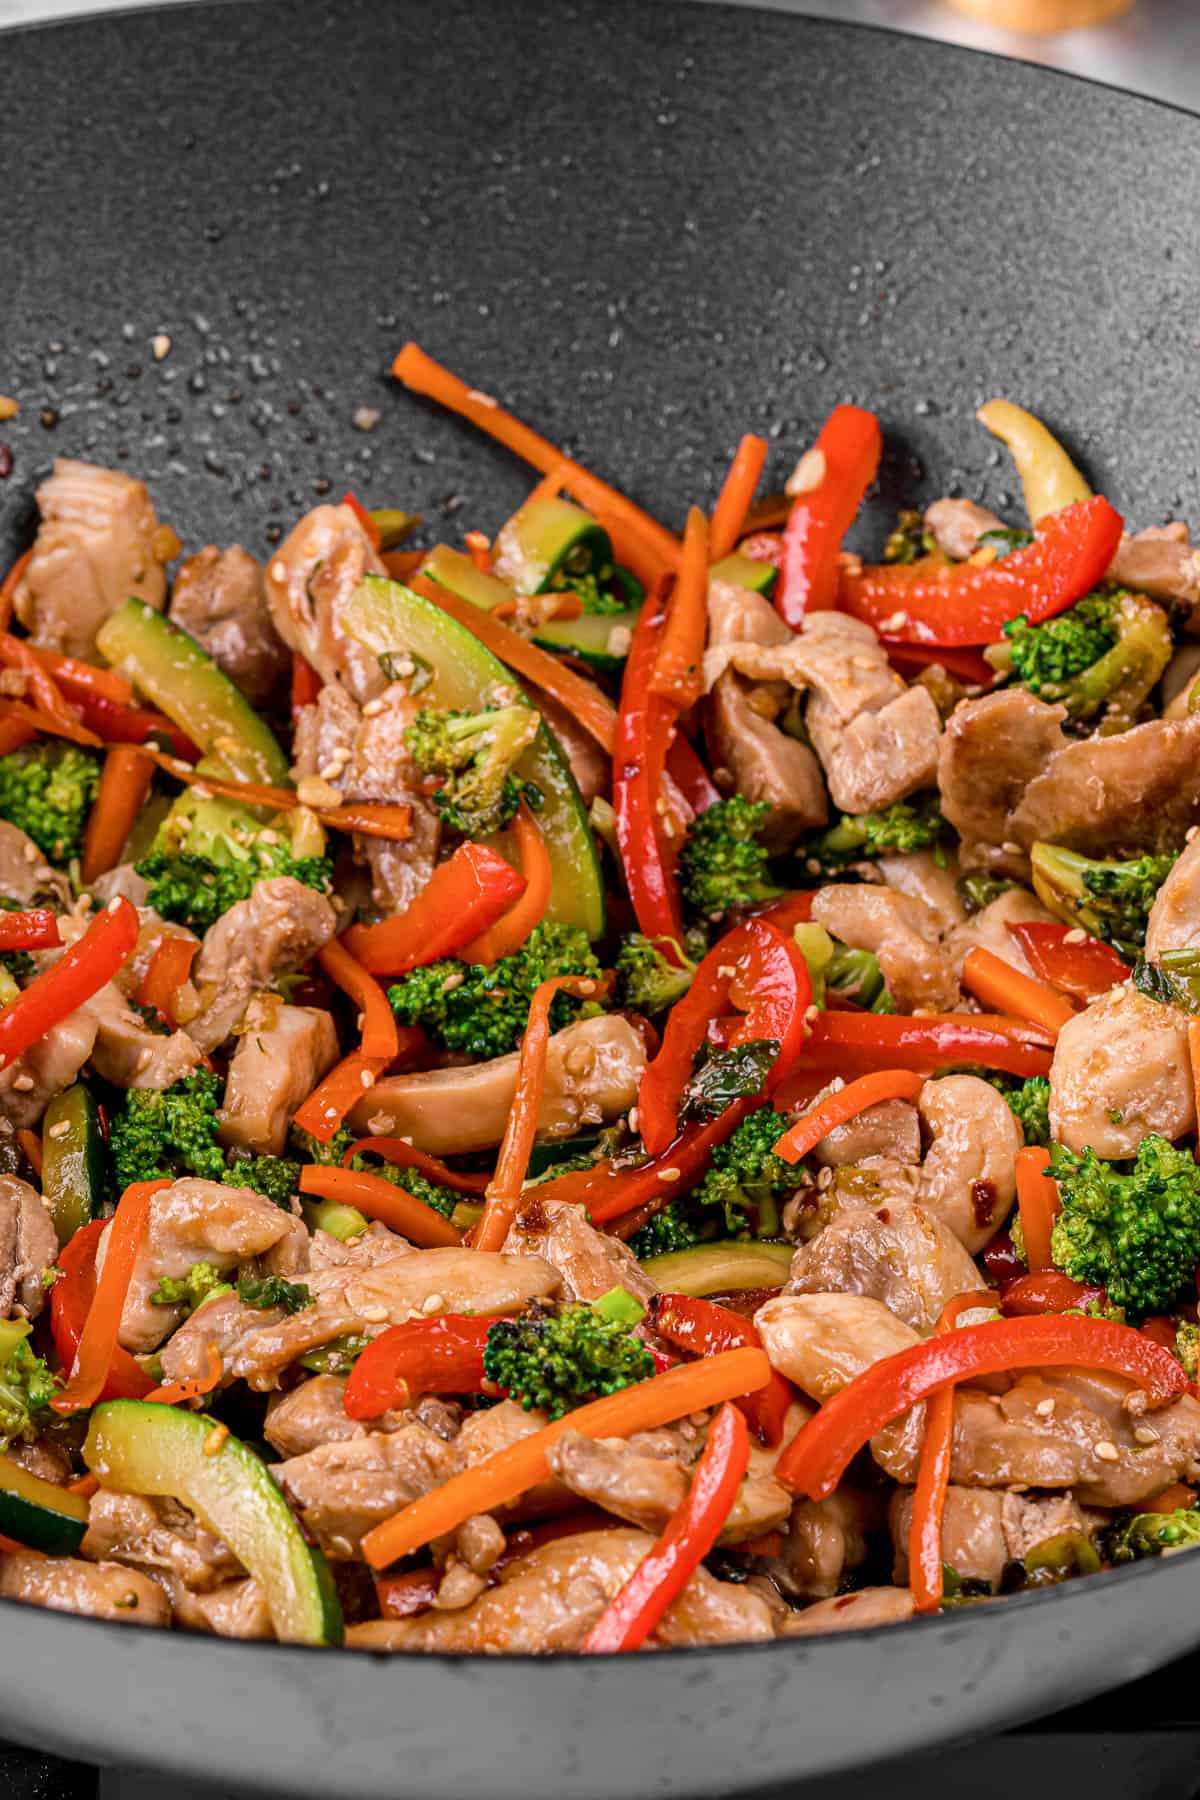 chicken stir fry with peppers, onions, broccoli and zucchini in wok pan.